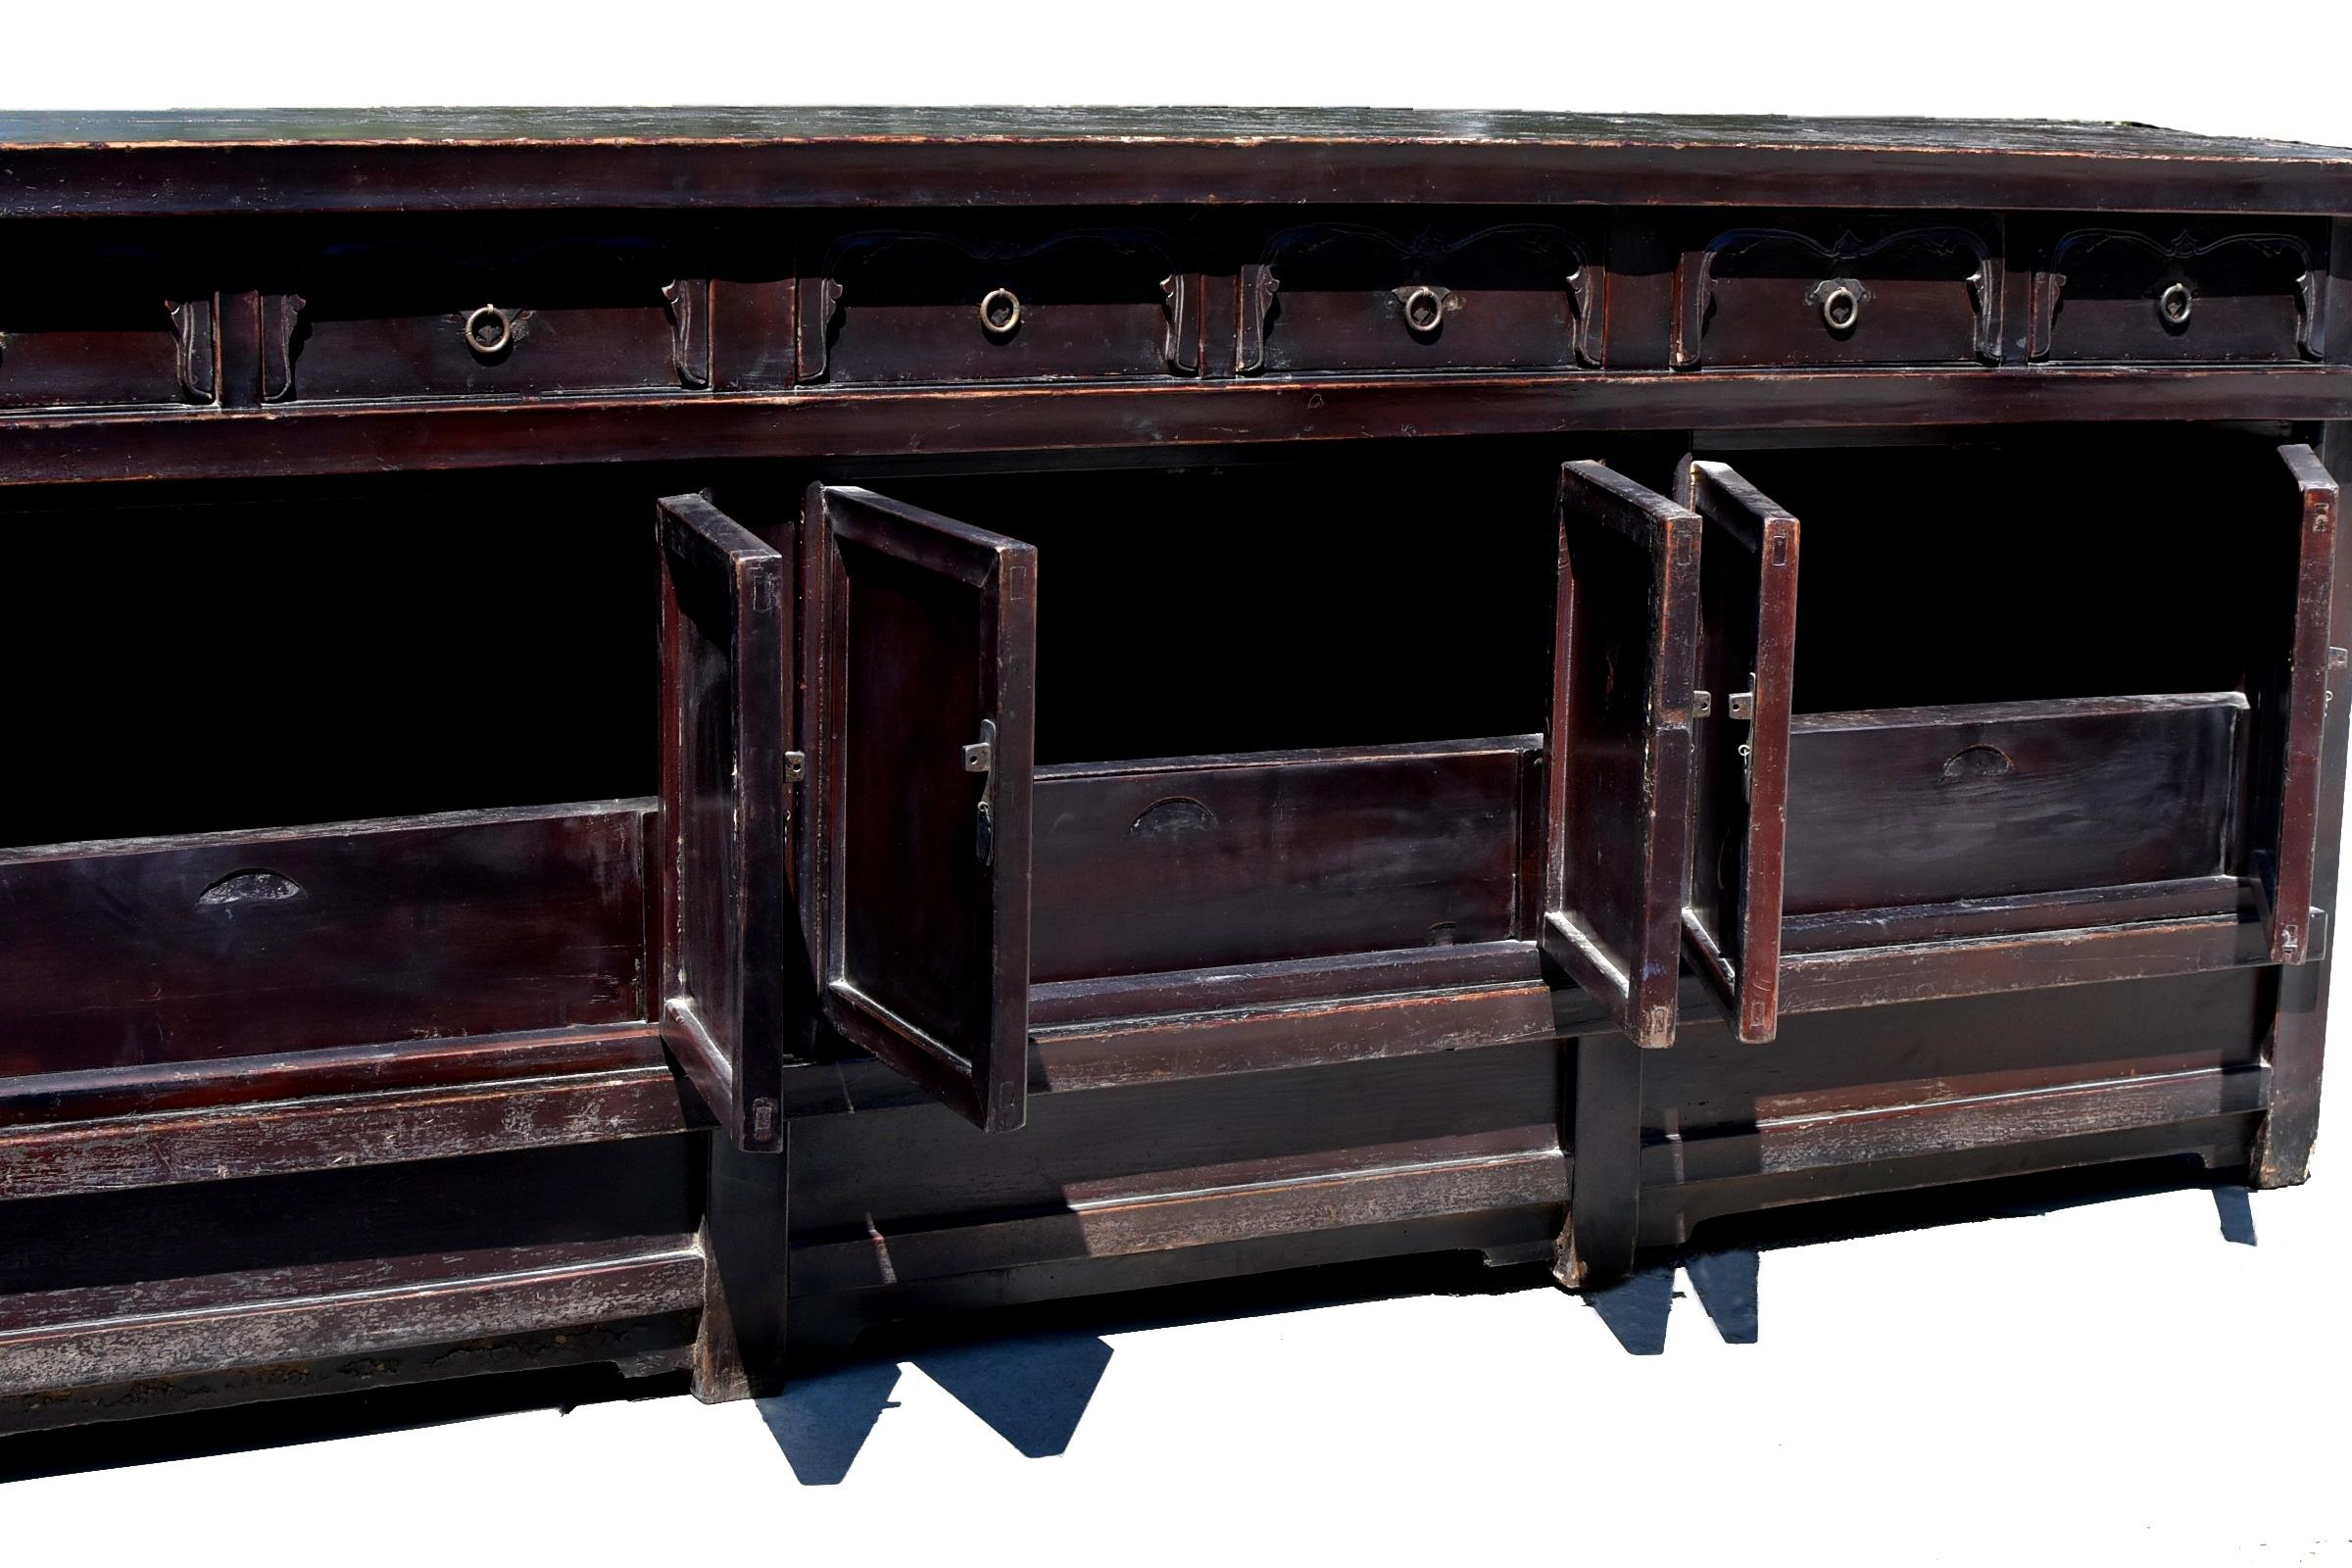 Monumental 19th Century Chinese Black Sideboard 9'8